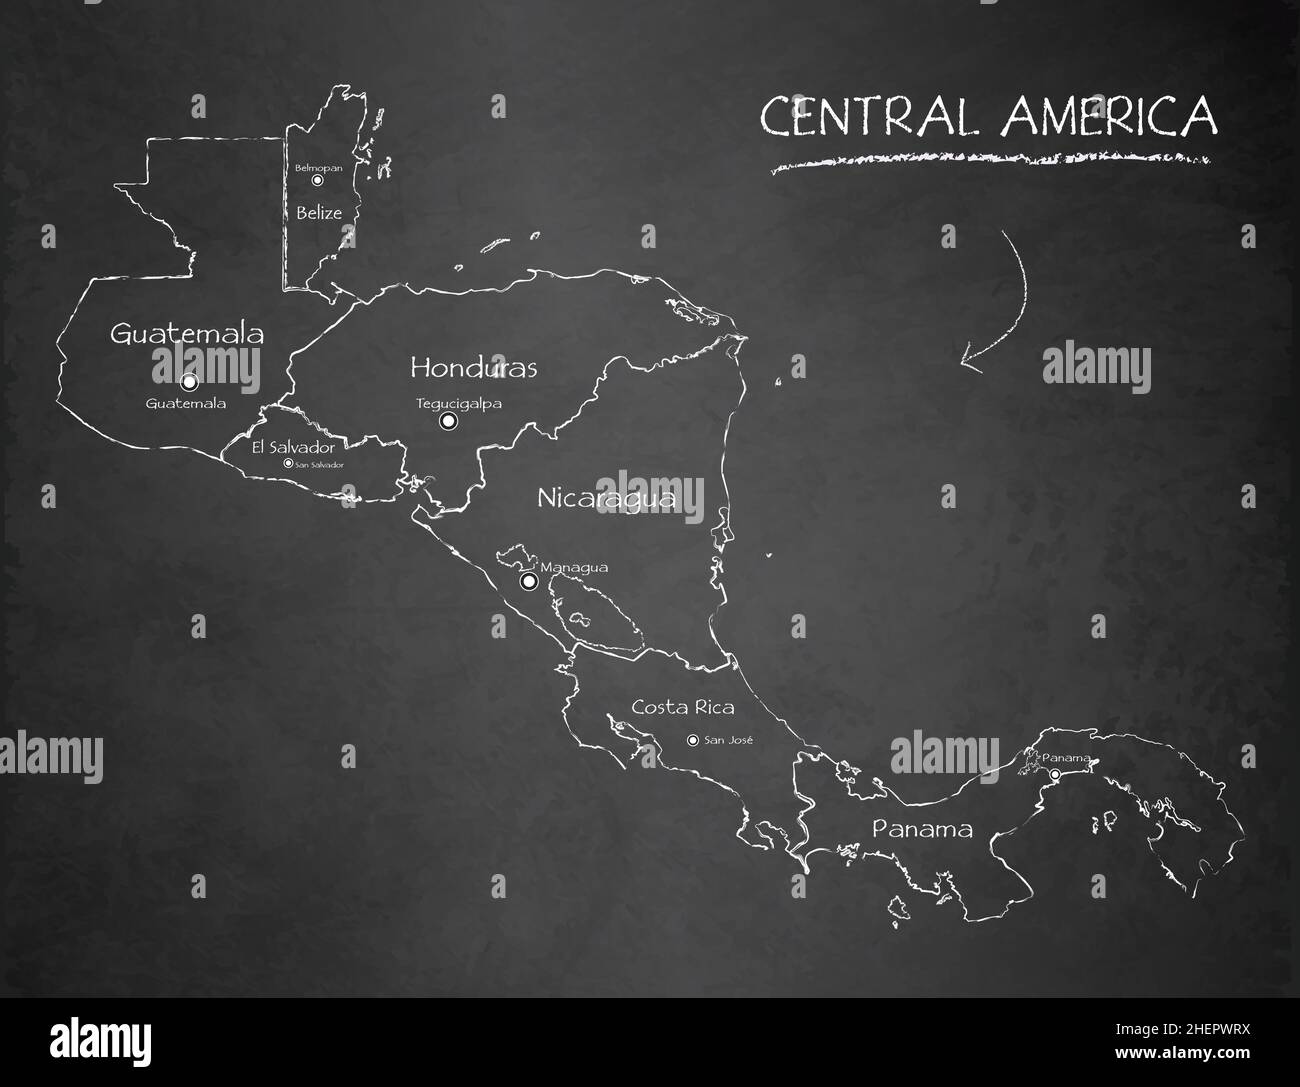 Central America map, separates states and names, design card blackboard chalkboard vector Stock Vector